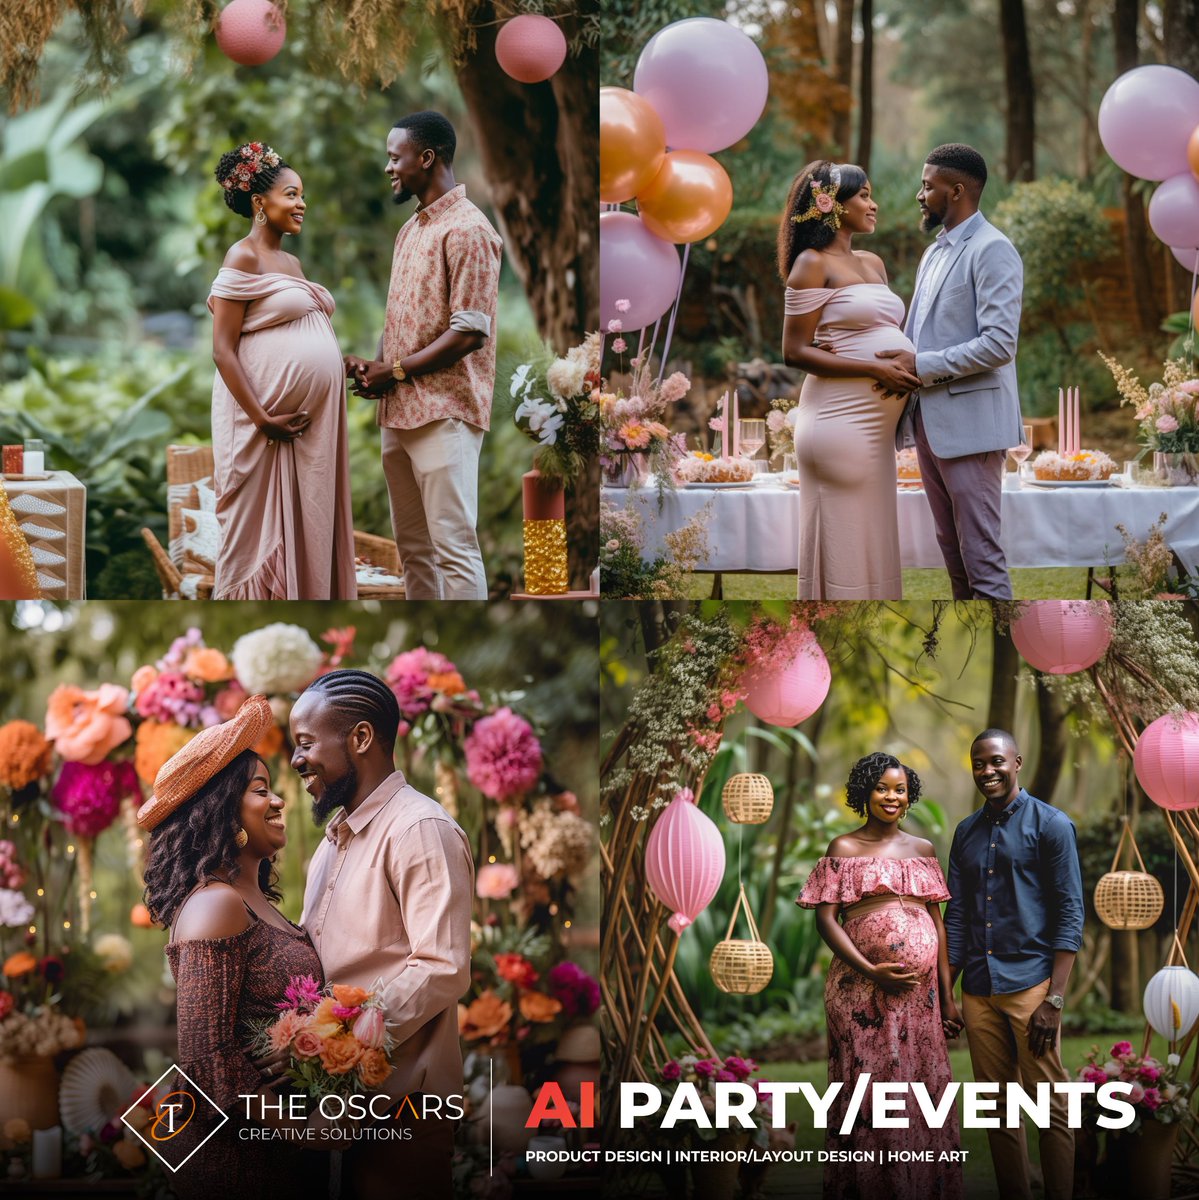 Embrace the joy of anticipation as AI showers you with brilliant baby shower ideas! From whimsical themes to delightful games, let the AI magic sprinkle your celebration with love and laughter. 🎉👶

Sabina joy Kikuyu Susan Nakhumicha Thika
Citizen TV Jeff Mwathi Mpesa HELB KEMSA